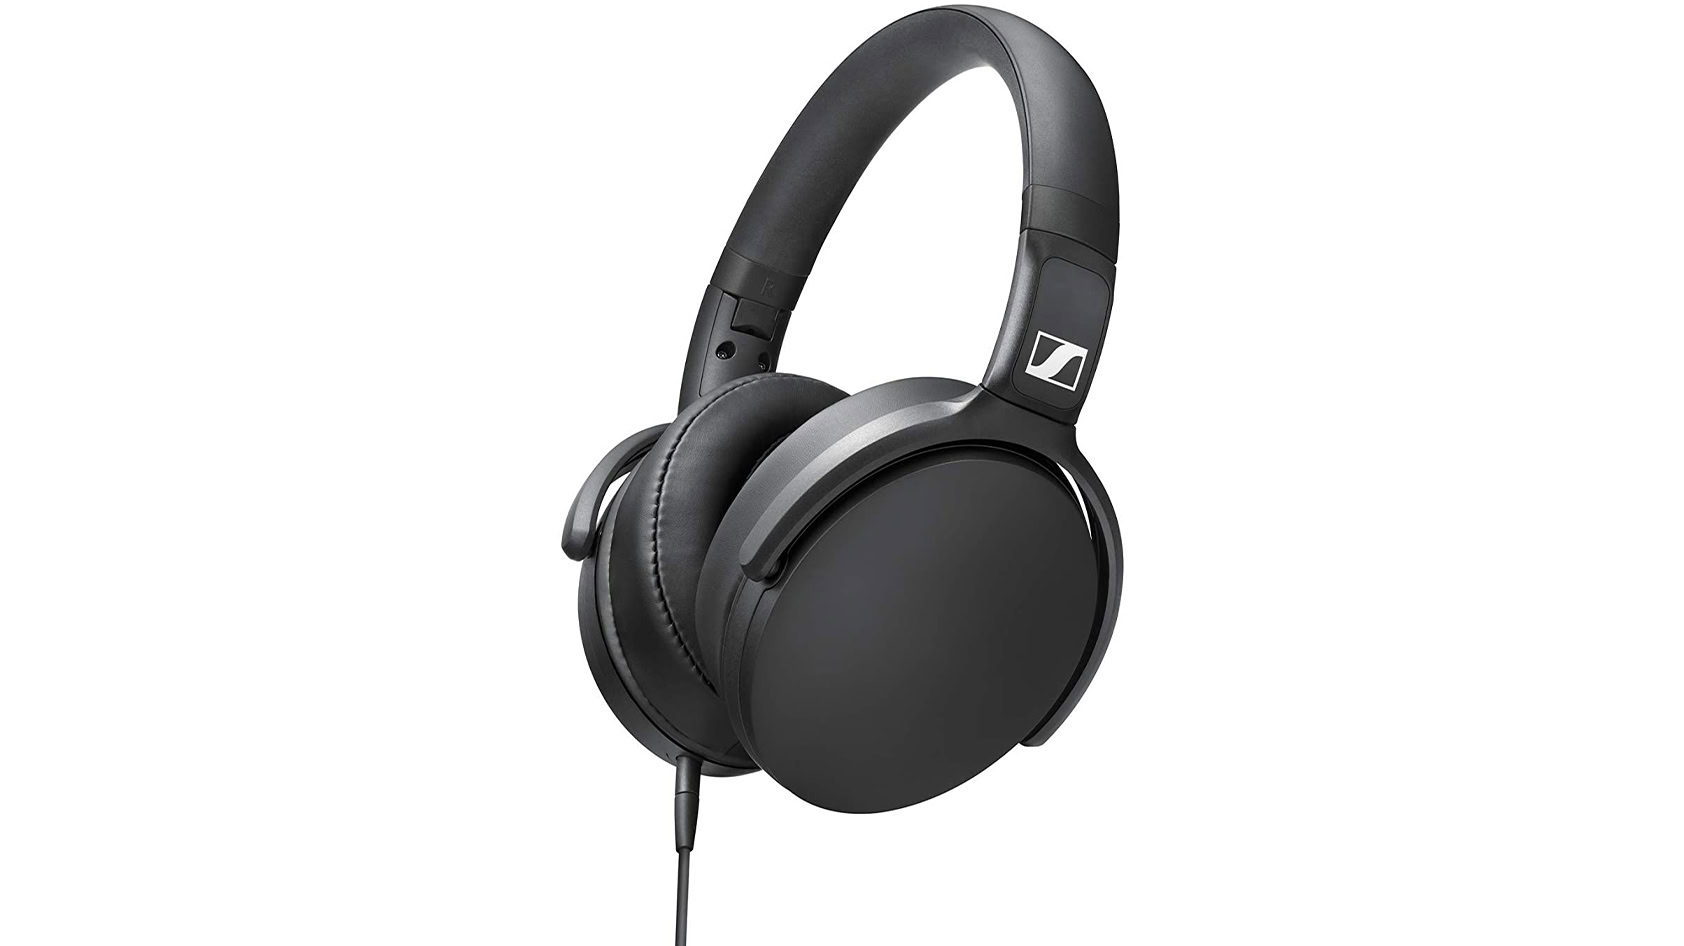 The Sennheiser HD 400S wired headphones in black against a white background.